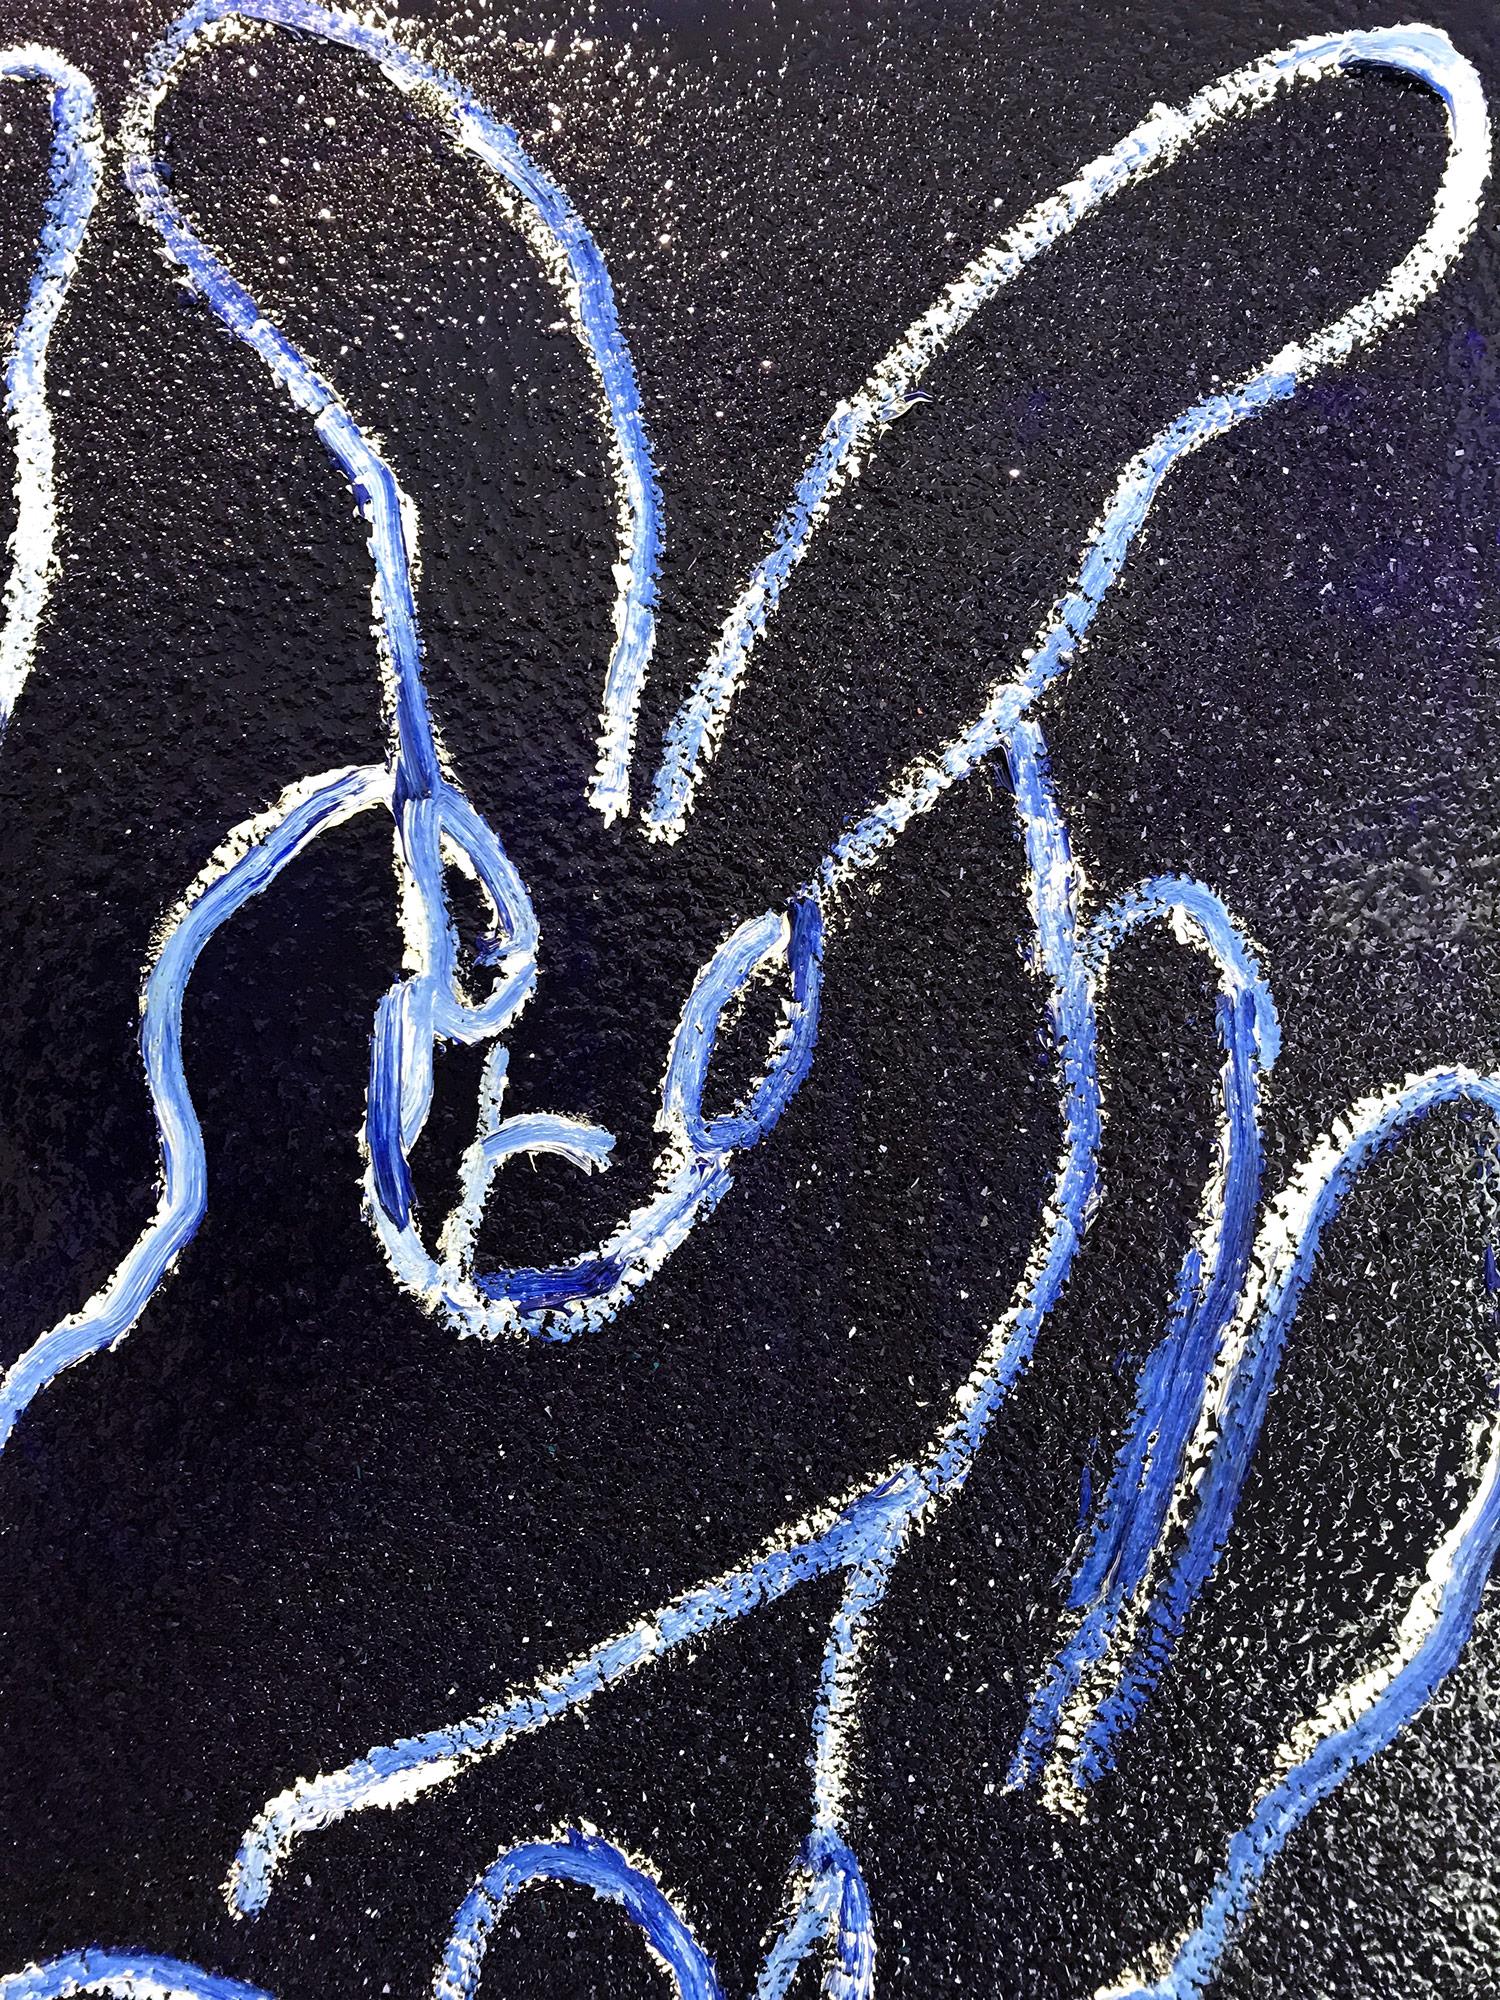 A stunning composition of one of Slonem's most iconic subjects, Bunnies. This piece depicts gestural figures of Bunnies against ultramarine blue diamond dust. Slonem traces these 20 bunnies with thick white paint and then encases the piece in